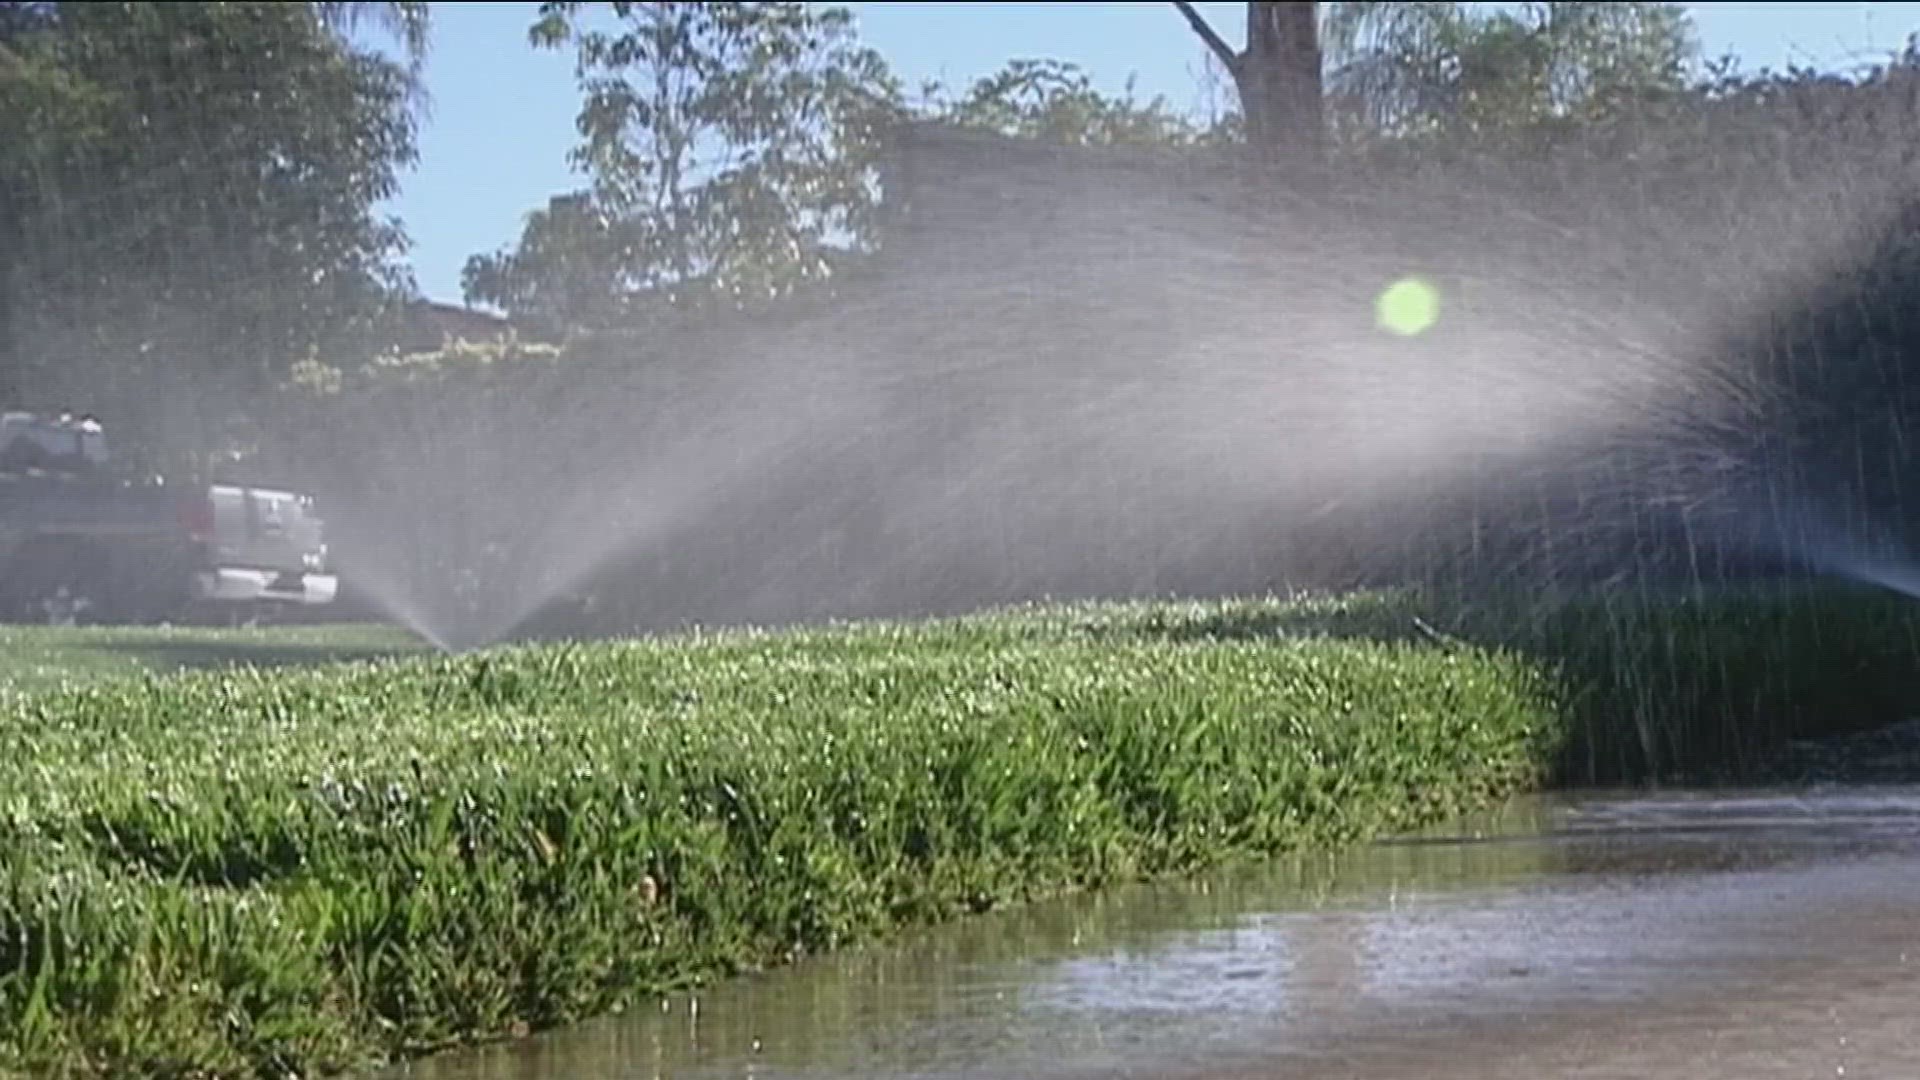 The North County communities say it would save residents $8 million a year and help the agriculture industry. Those opposed say water rates will go up.